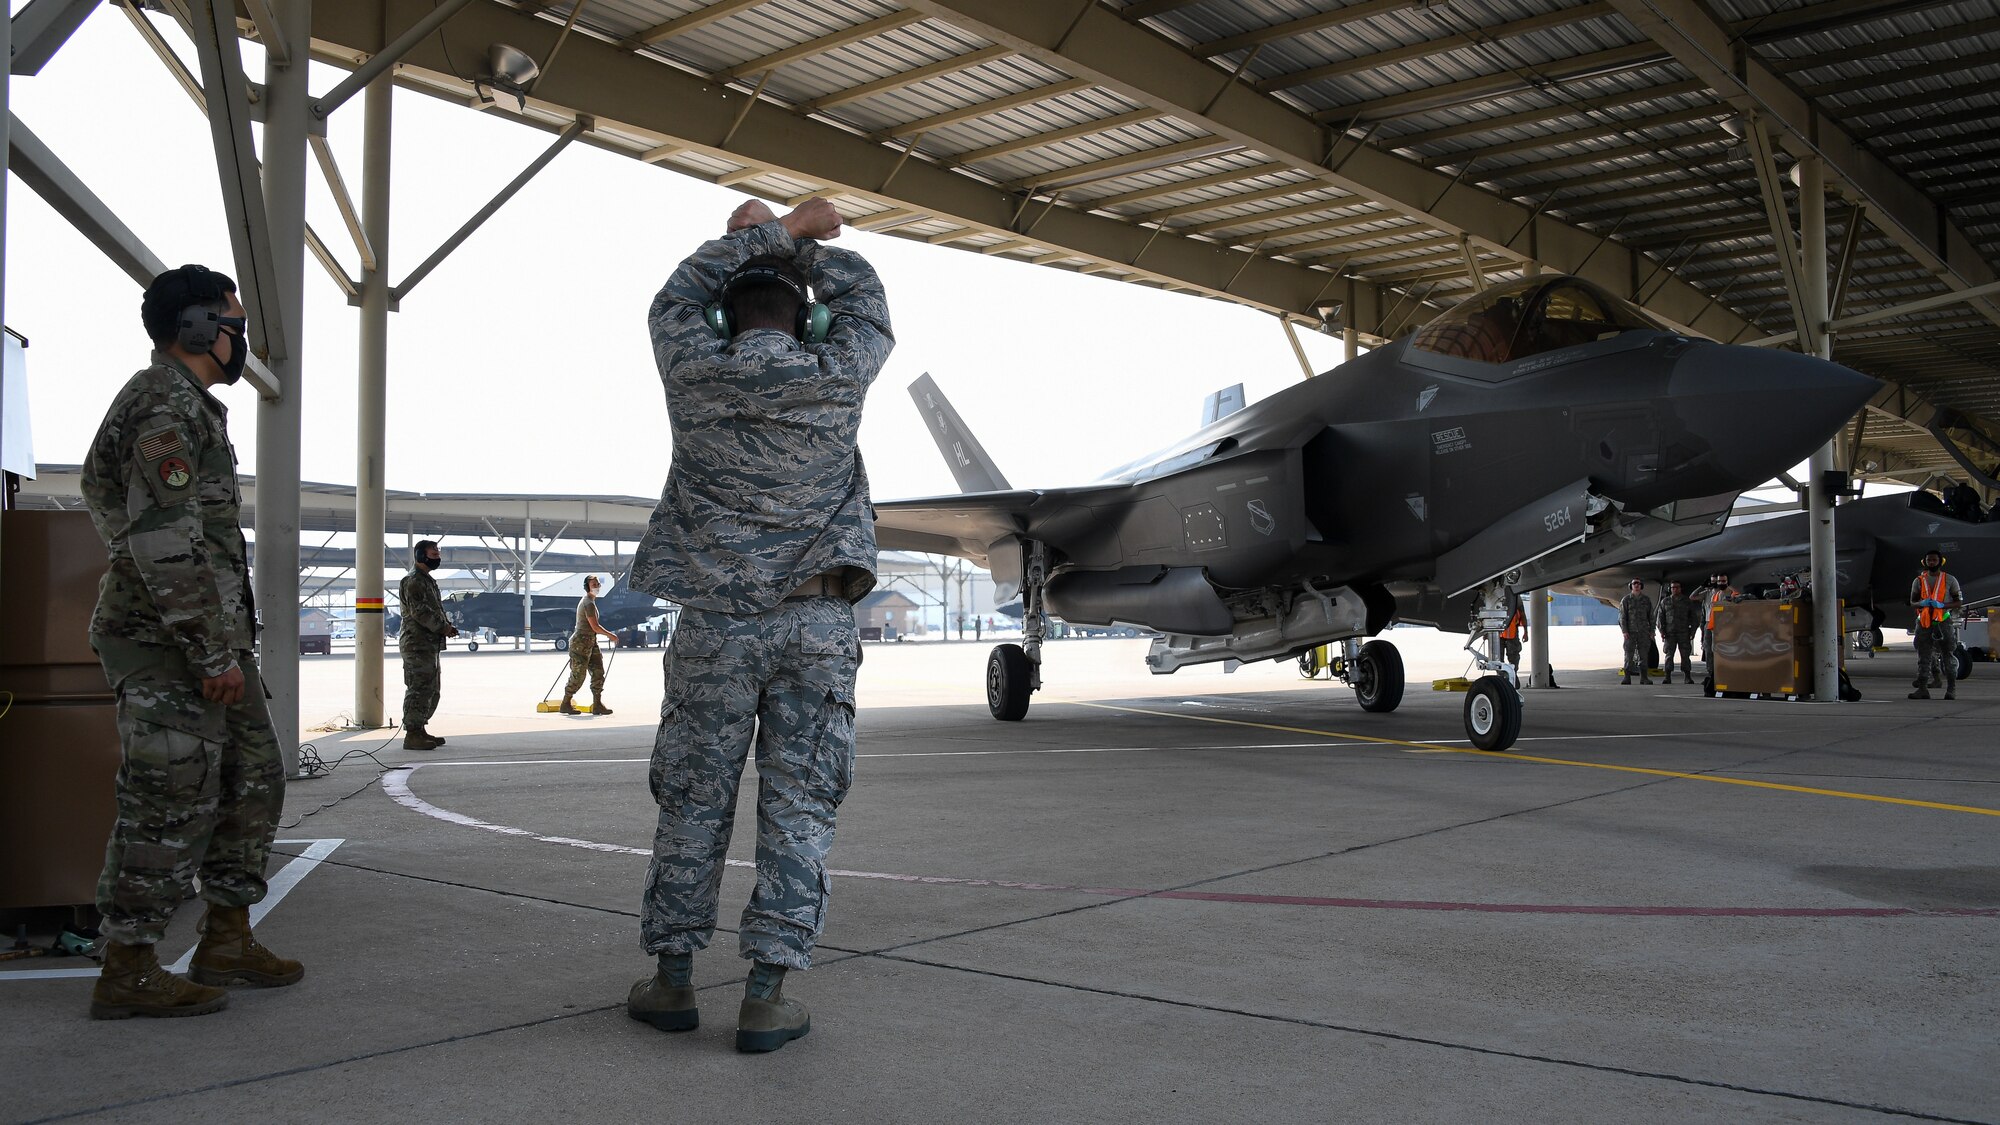 A photo of an F-35 training course at Hill Air Force Base, Utah.